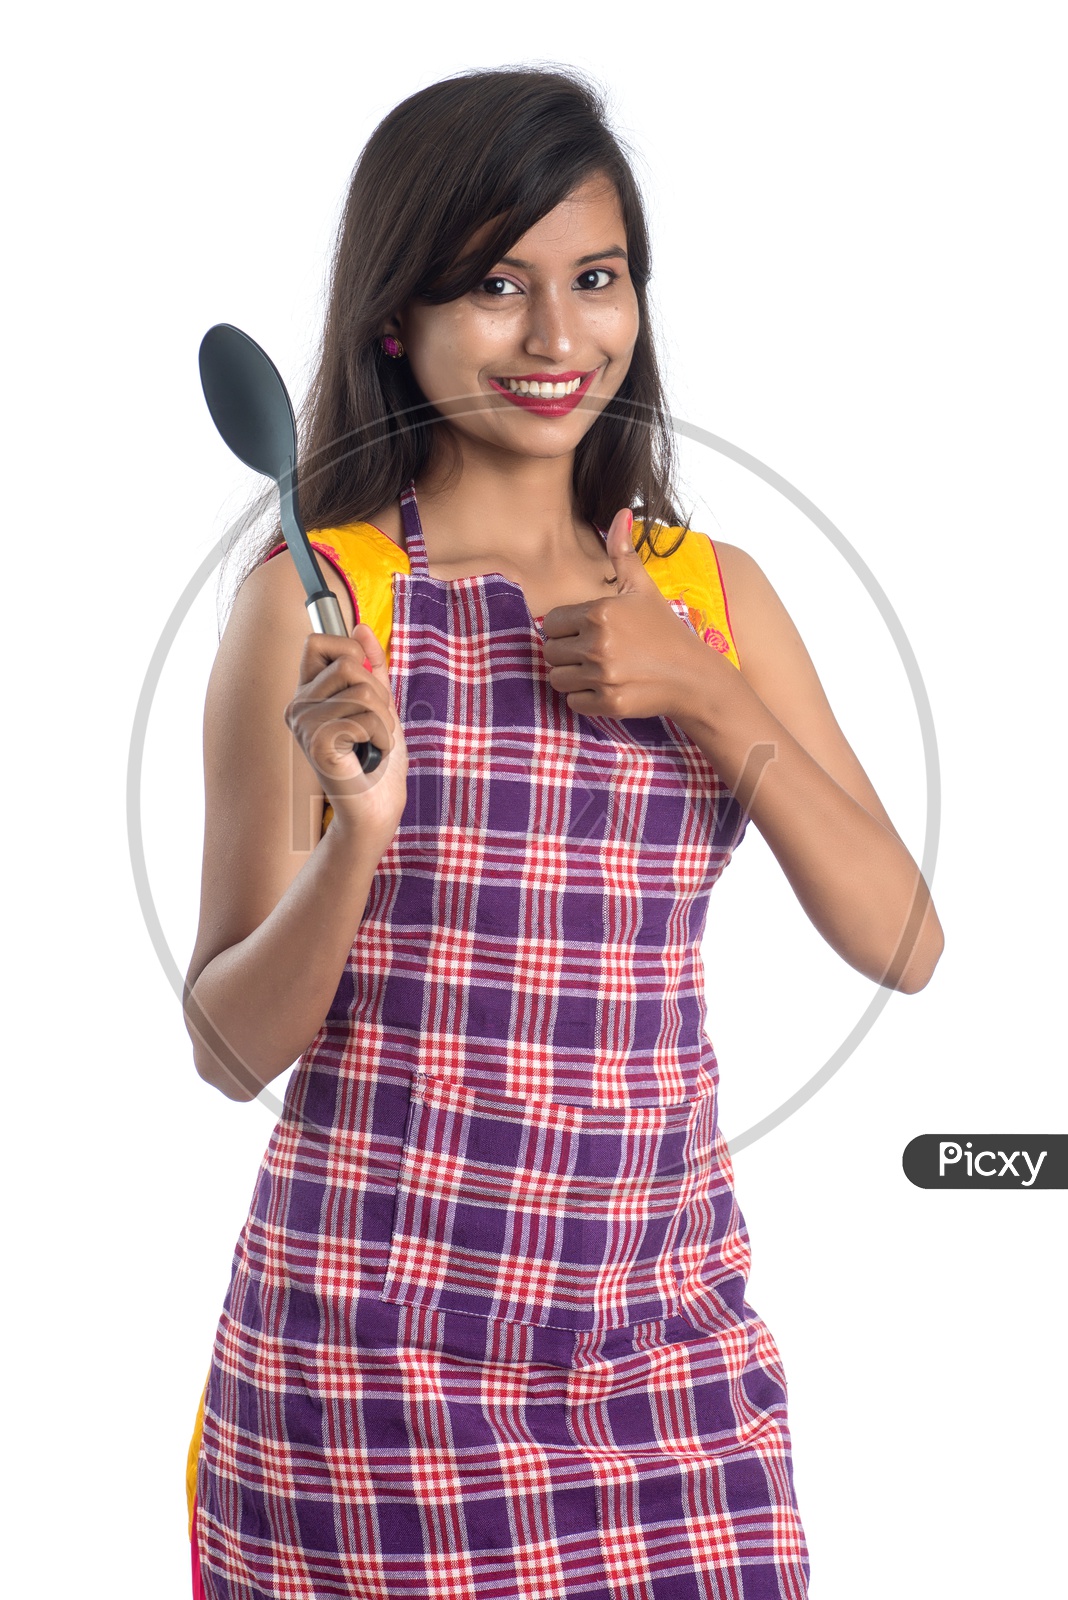 Young Indian Woman Or House Wife Or Girl With Cooking utensils And Posing On an Isolated White background